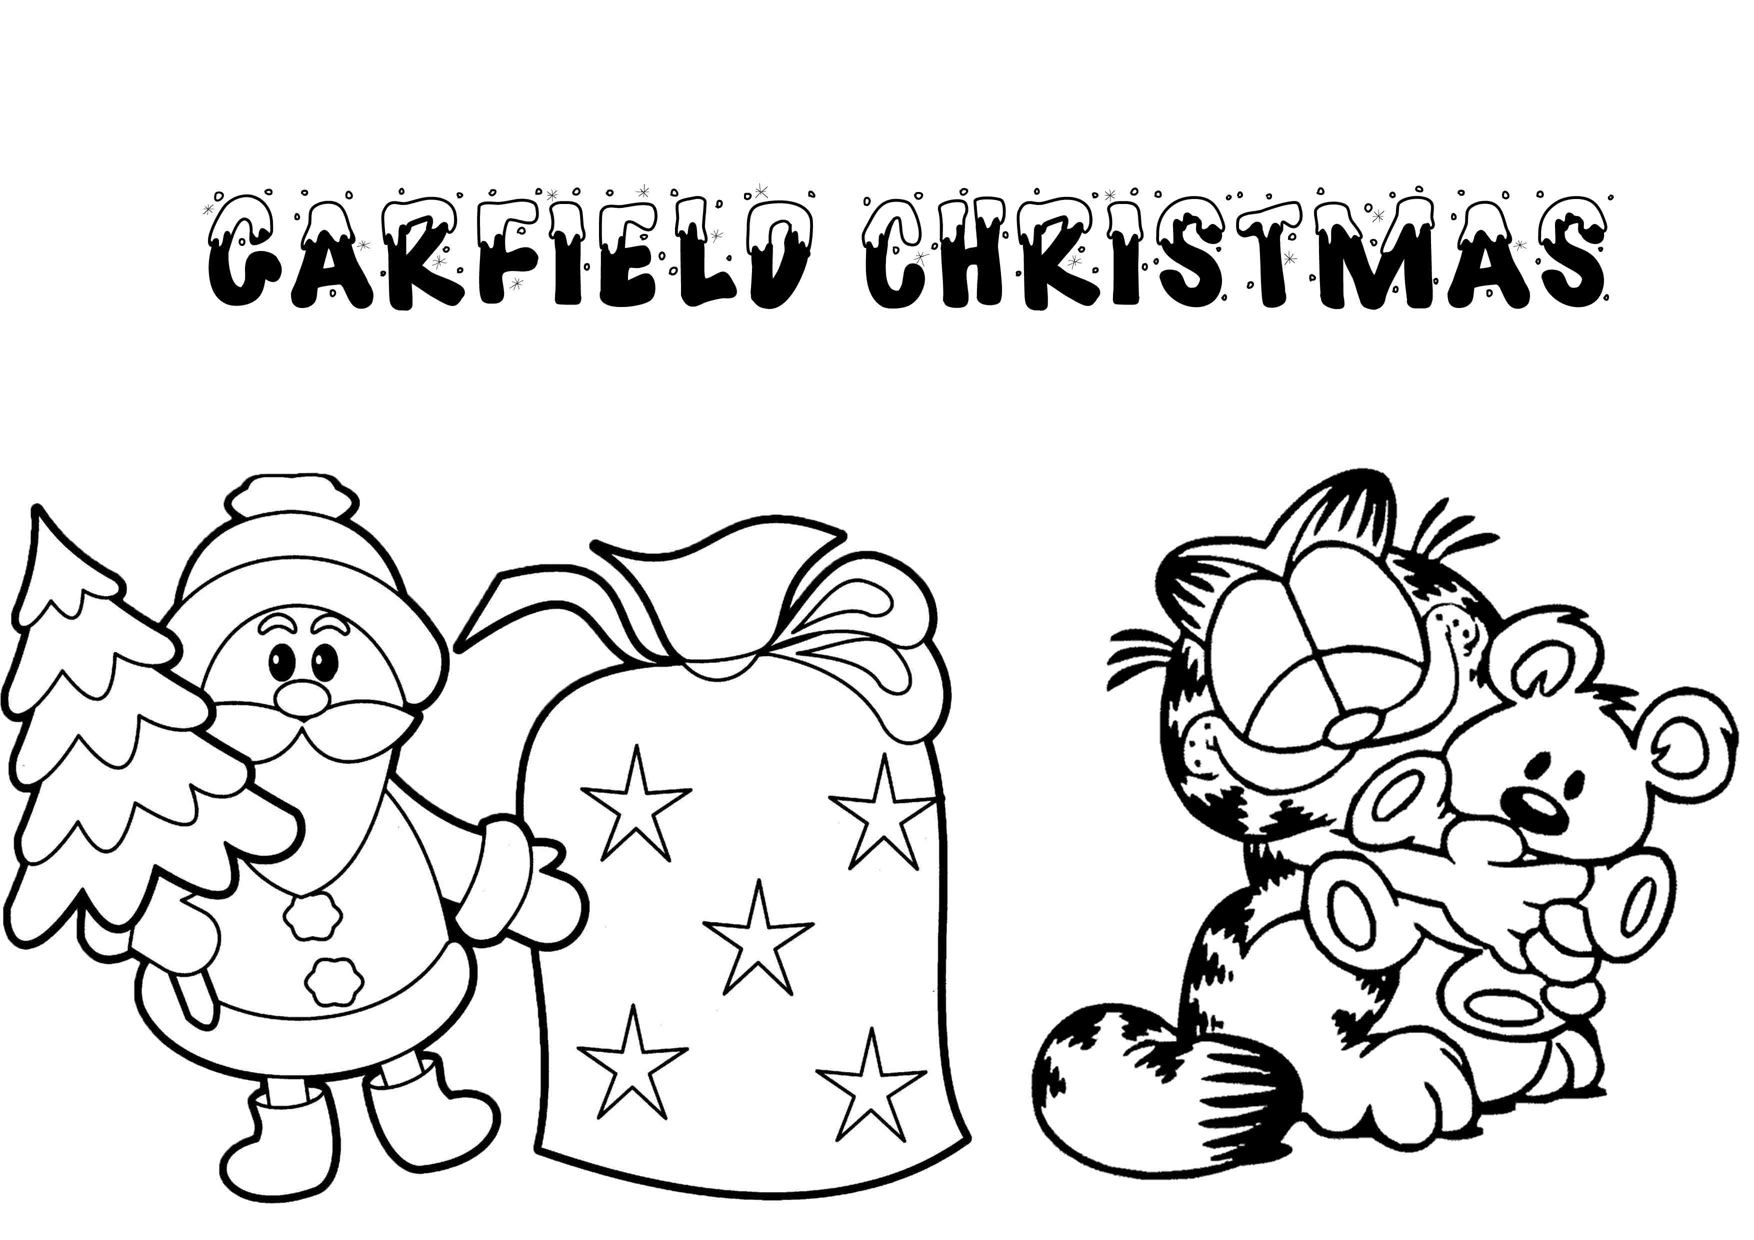 Print &amp;amp; Download - Printable Christmas Coloring Pages For Kids - Free Printable Christmas Cartoon Coloring Pages